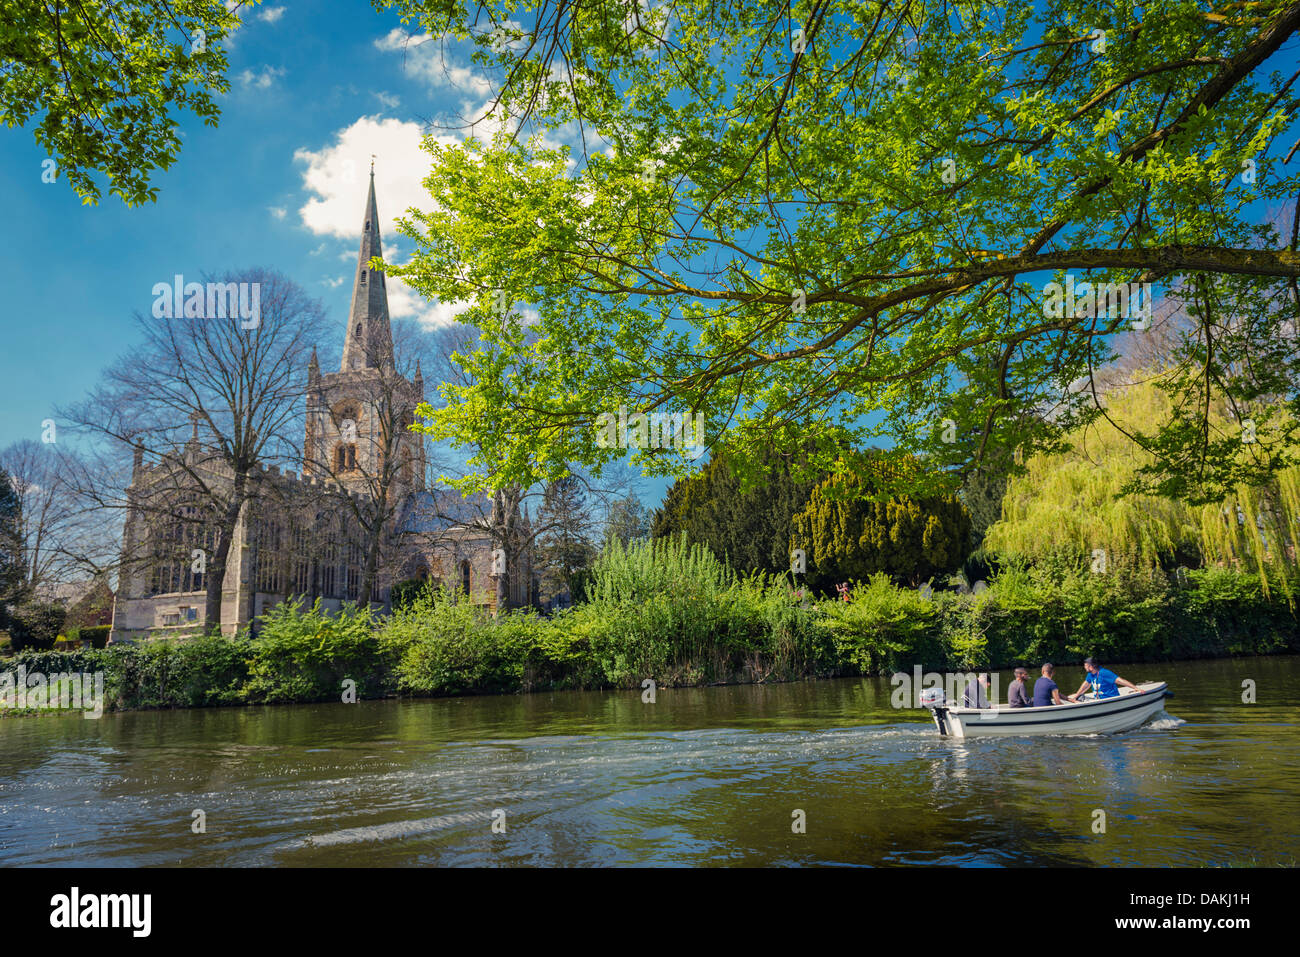 A motorboat on the river Avon in front of Trinity church on the banks of the river Avon in Stratford-Upon-Avon, United Kingdom Stock Photo